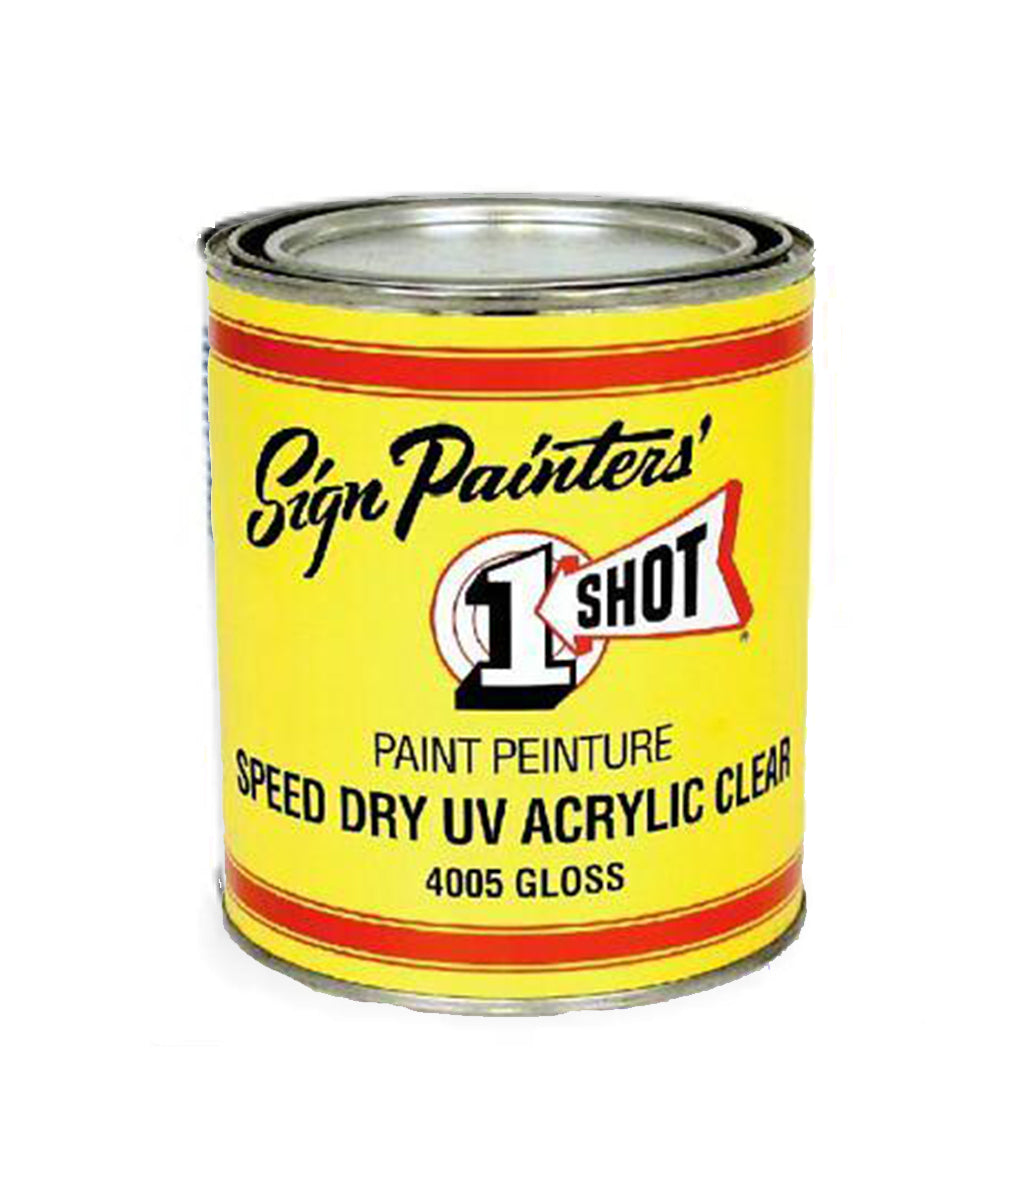 One Shot UV Acrylic Clear Gloss, available at Clement's Paint in Austin, TX.